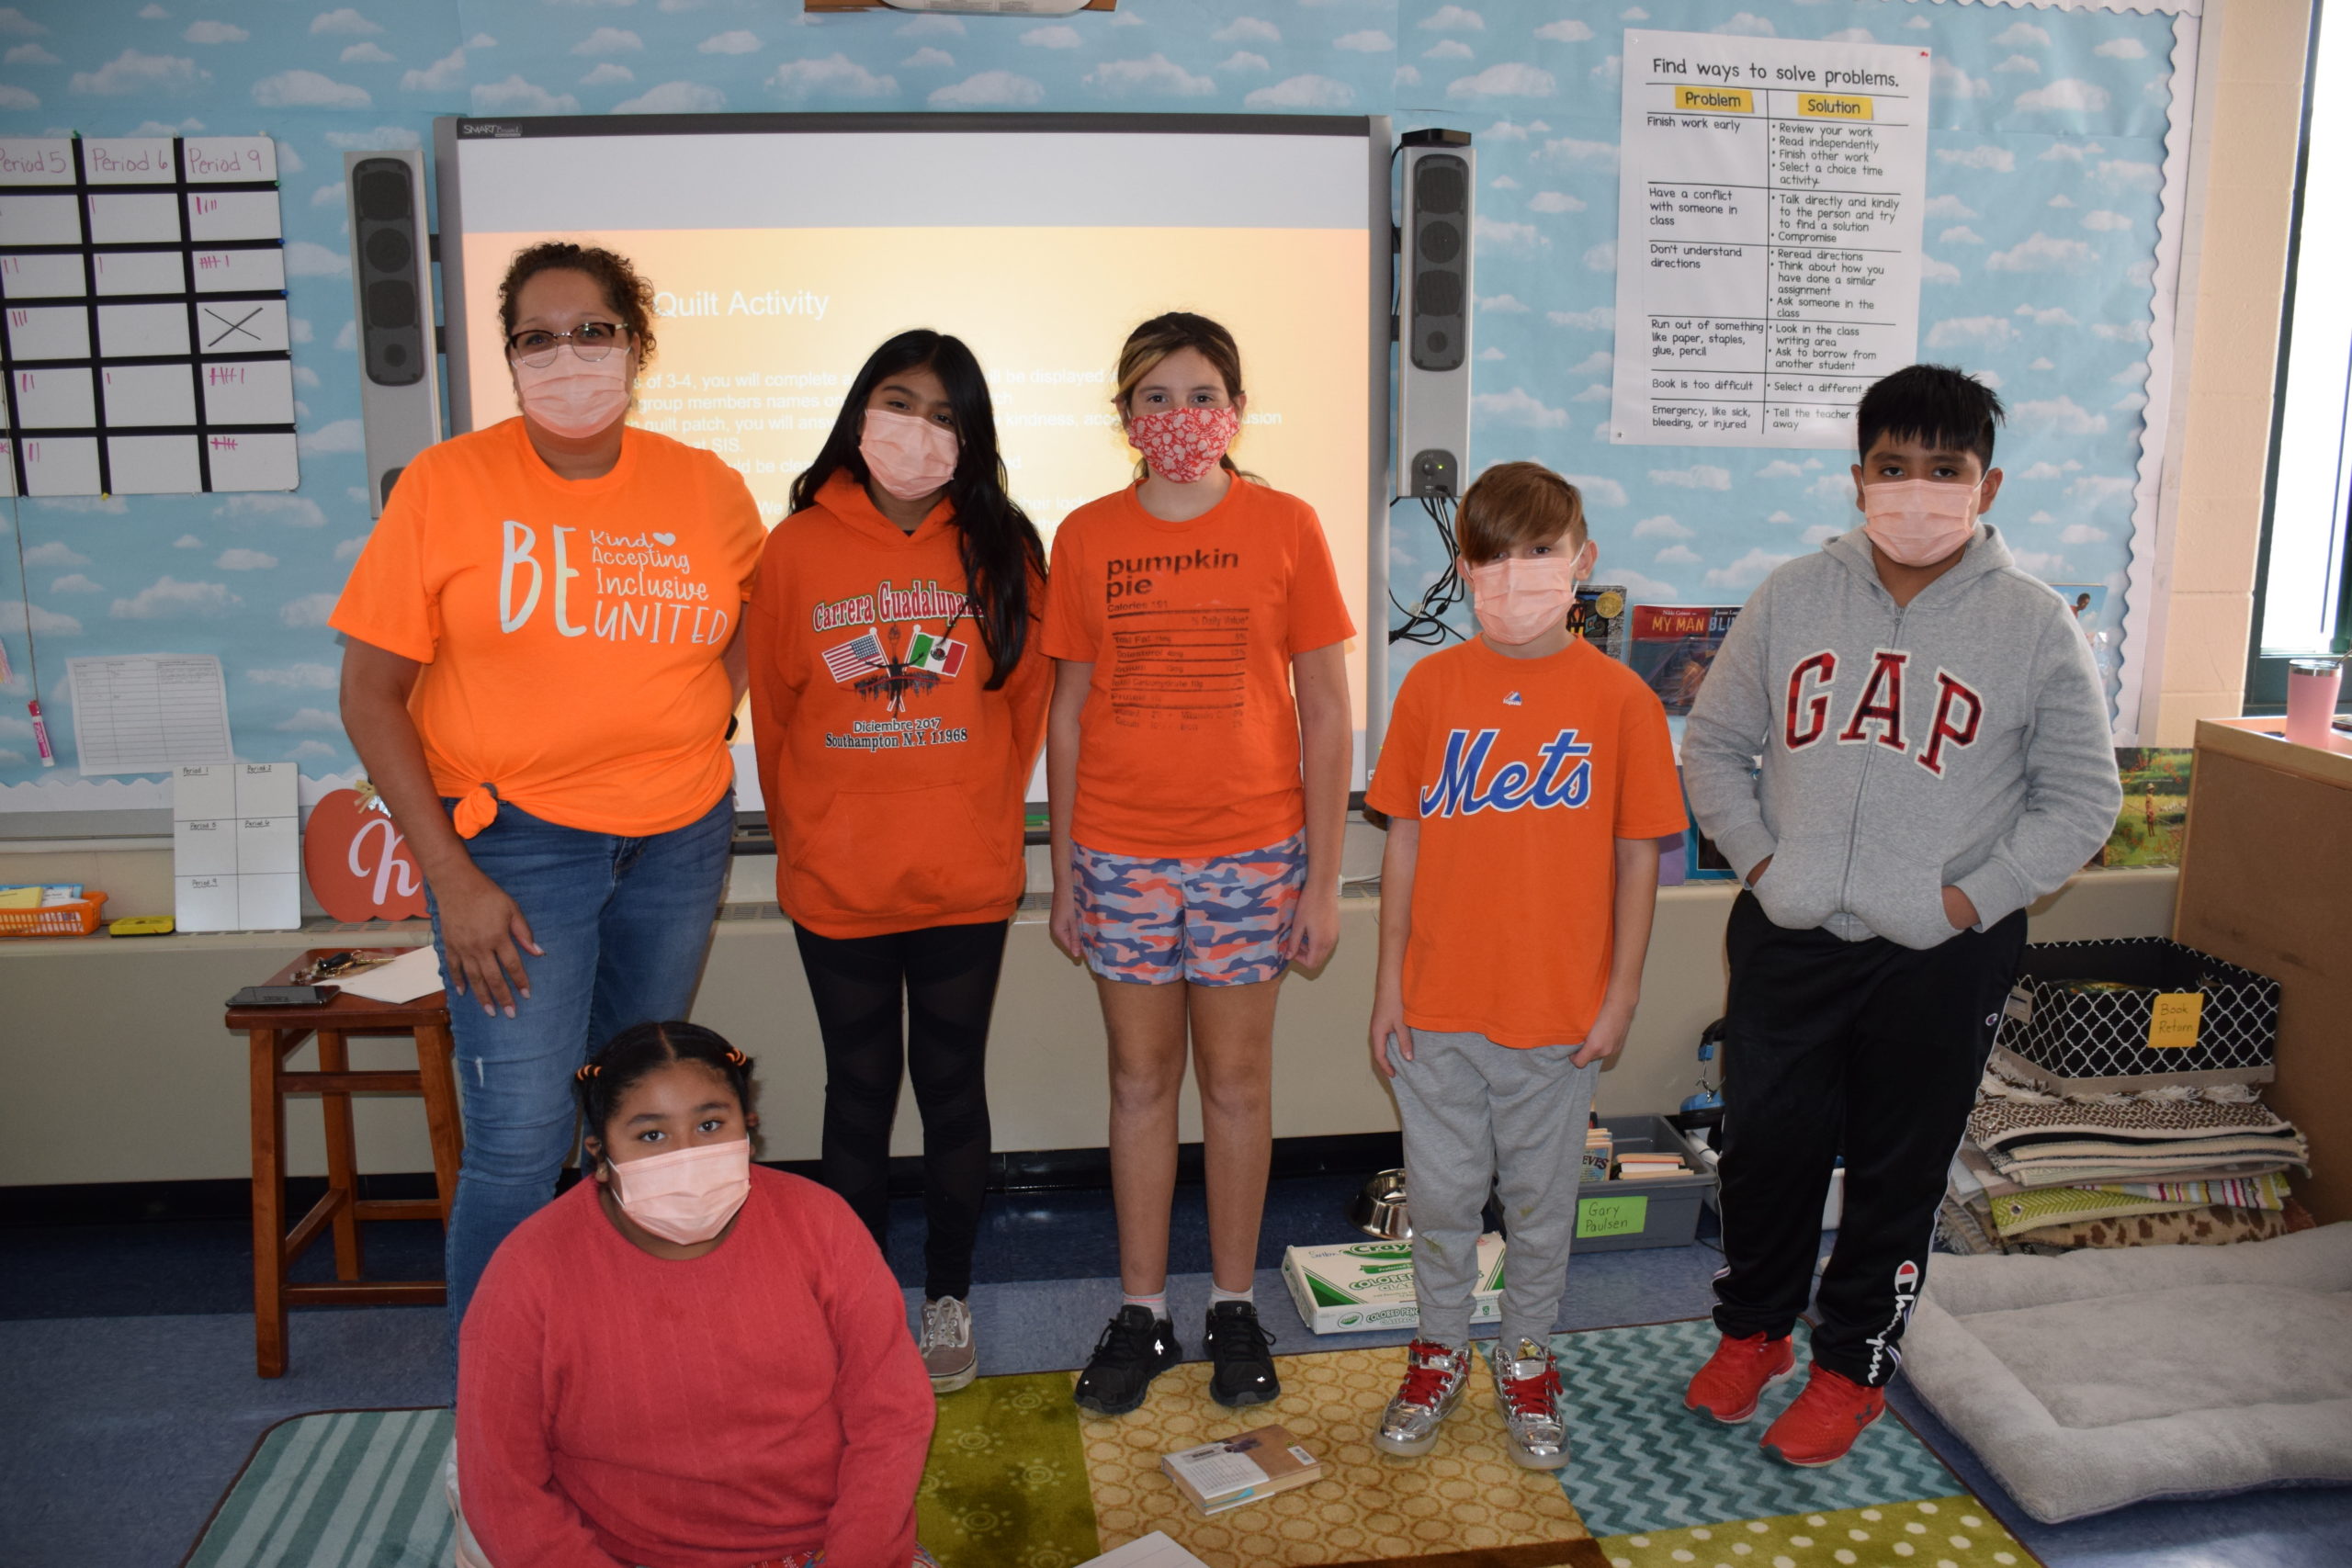 The halls and classrooms of Southampton Intermediate School were filled with the color orange as students and staff celebrated Unity Day on October. 20. The annual event was sponsored by the school’s guidance department. Wearing orange shirts and face masks, the students created a paper “unity quilt” with each quilt piece representing a student’s thoughts on acceptance, kindness and inclusion. All of the pieces will be “sewn” together and displayed in the school’s main hallway.